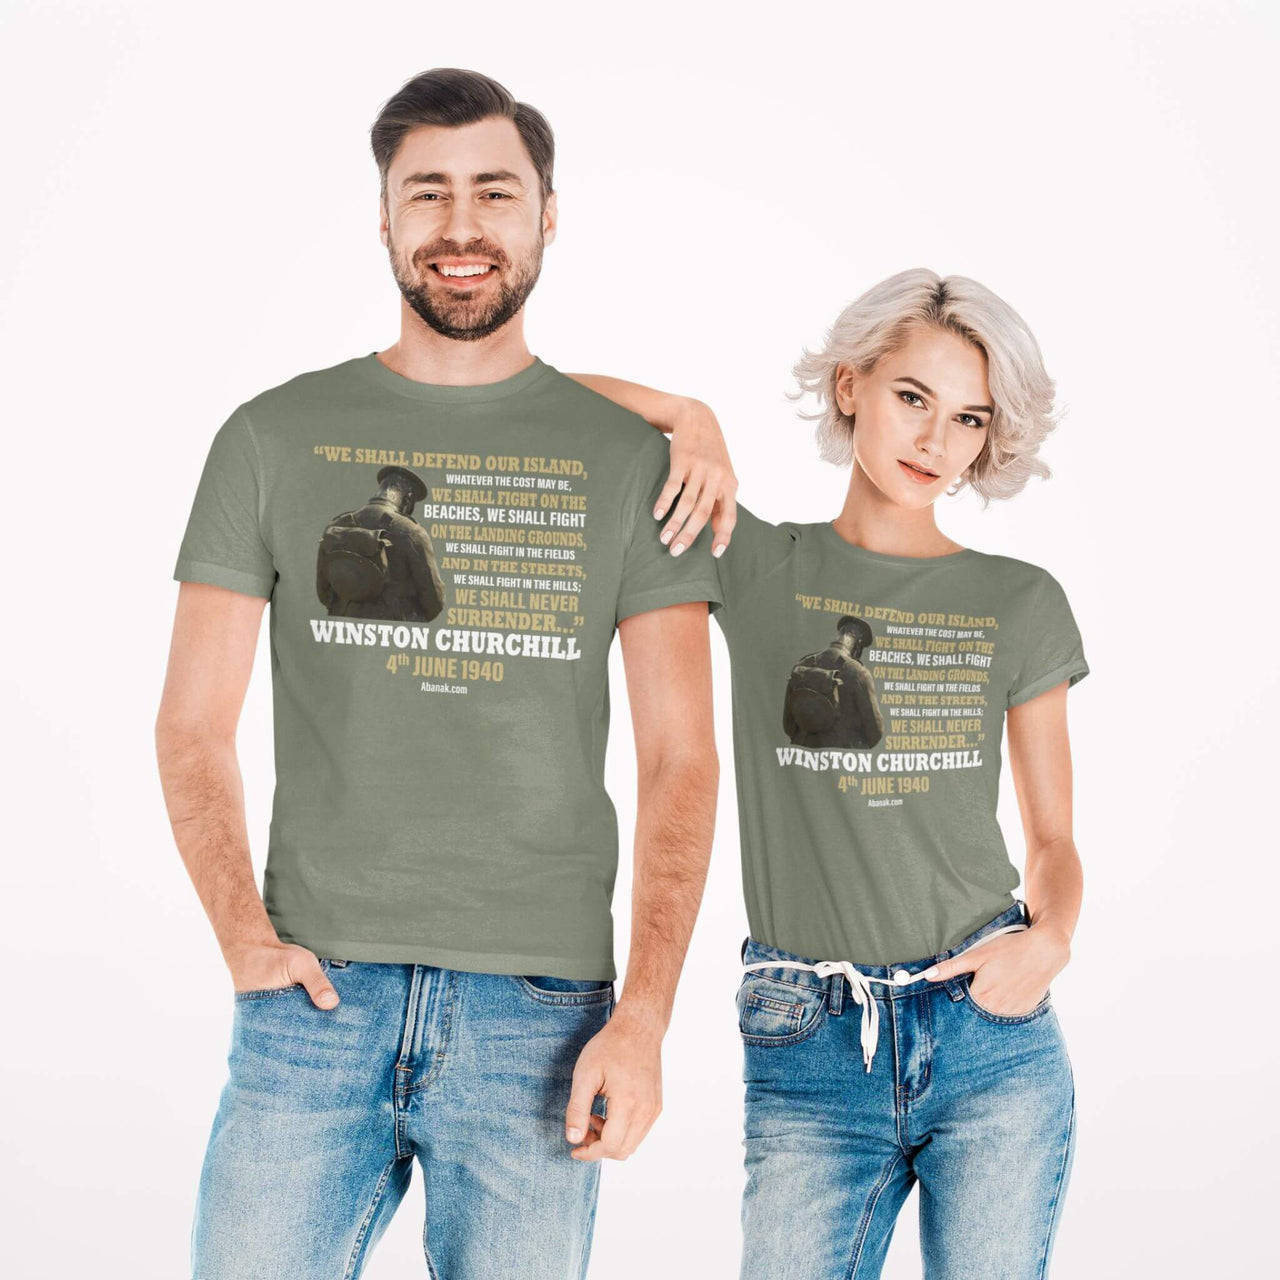 We Shall Never Surrender - Winston Churchill Inspirational Quote - Unisex Vintage Tee